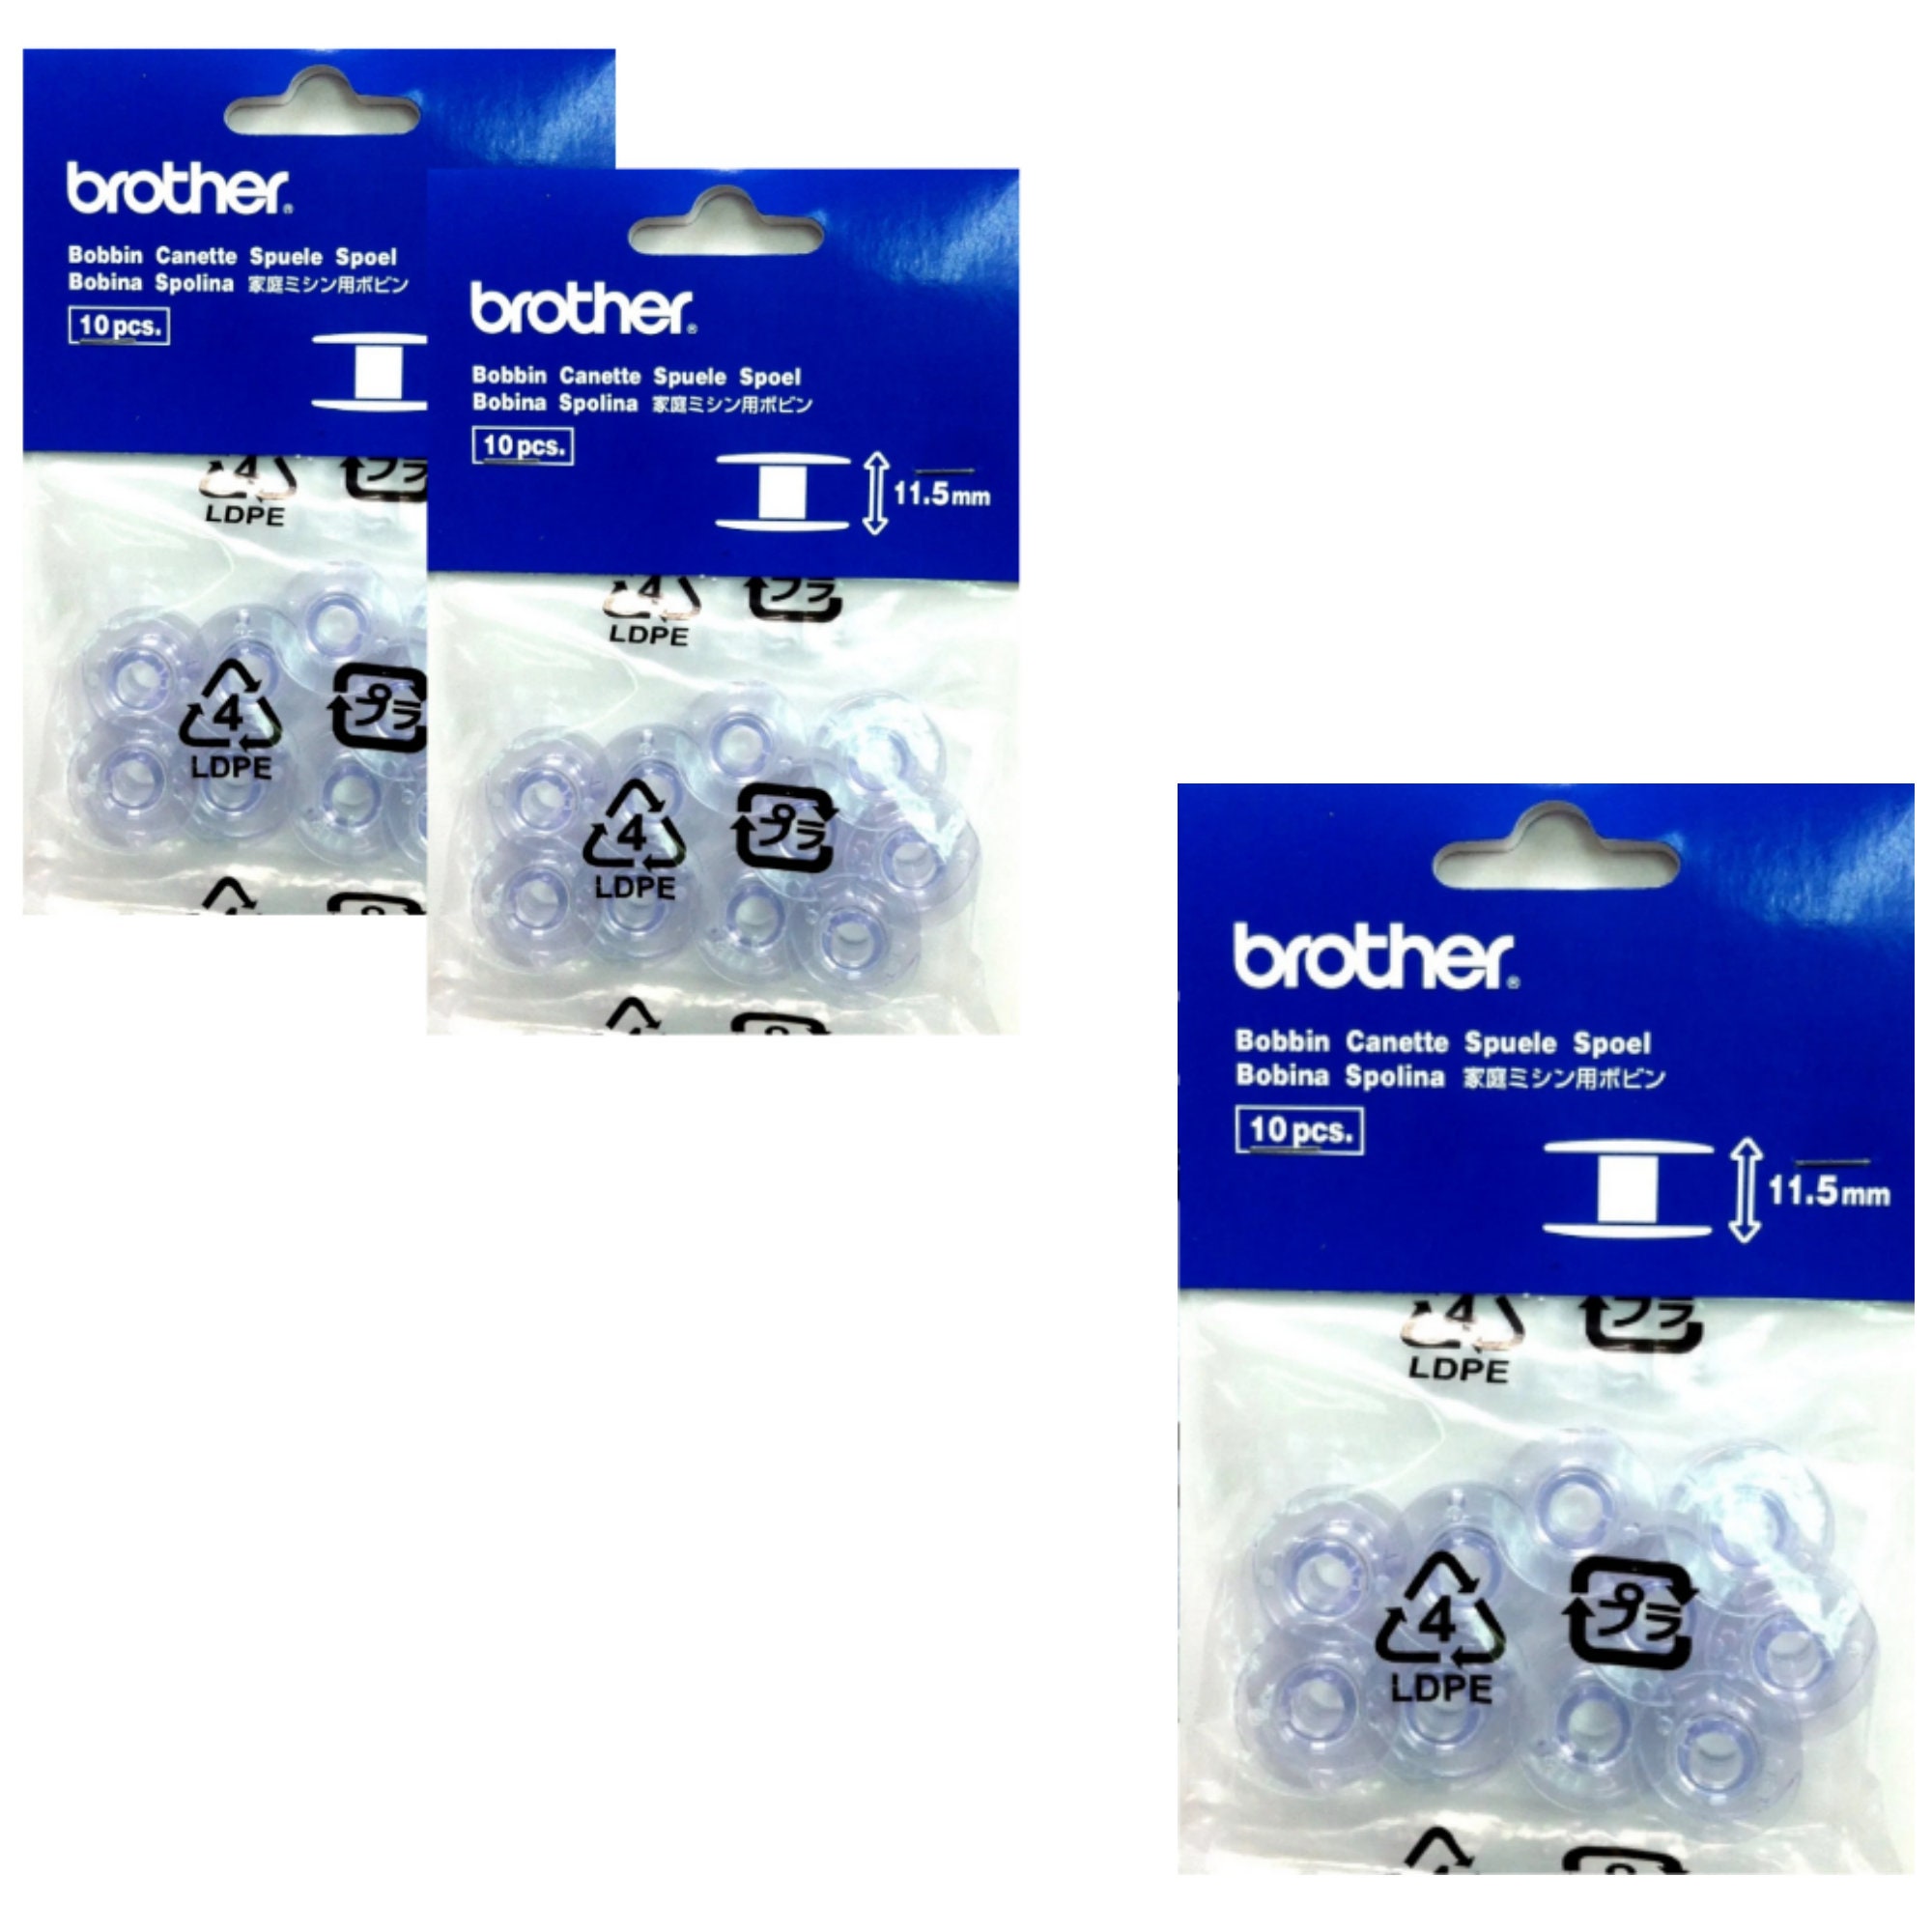 Brother Embroidery Machine Bobbins, White, Fits Entrepreneur Prox